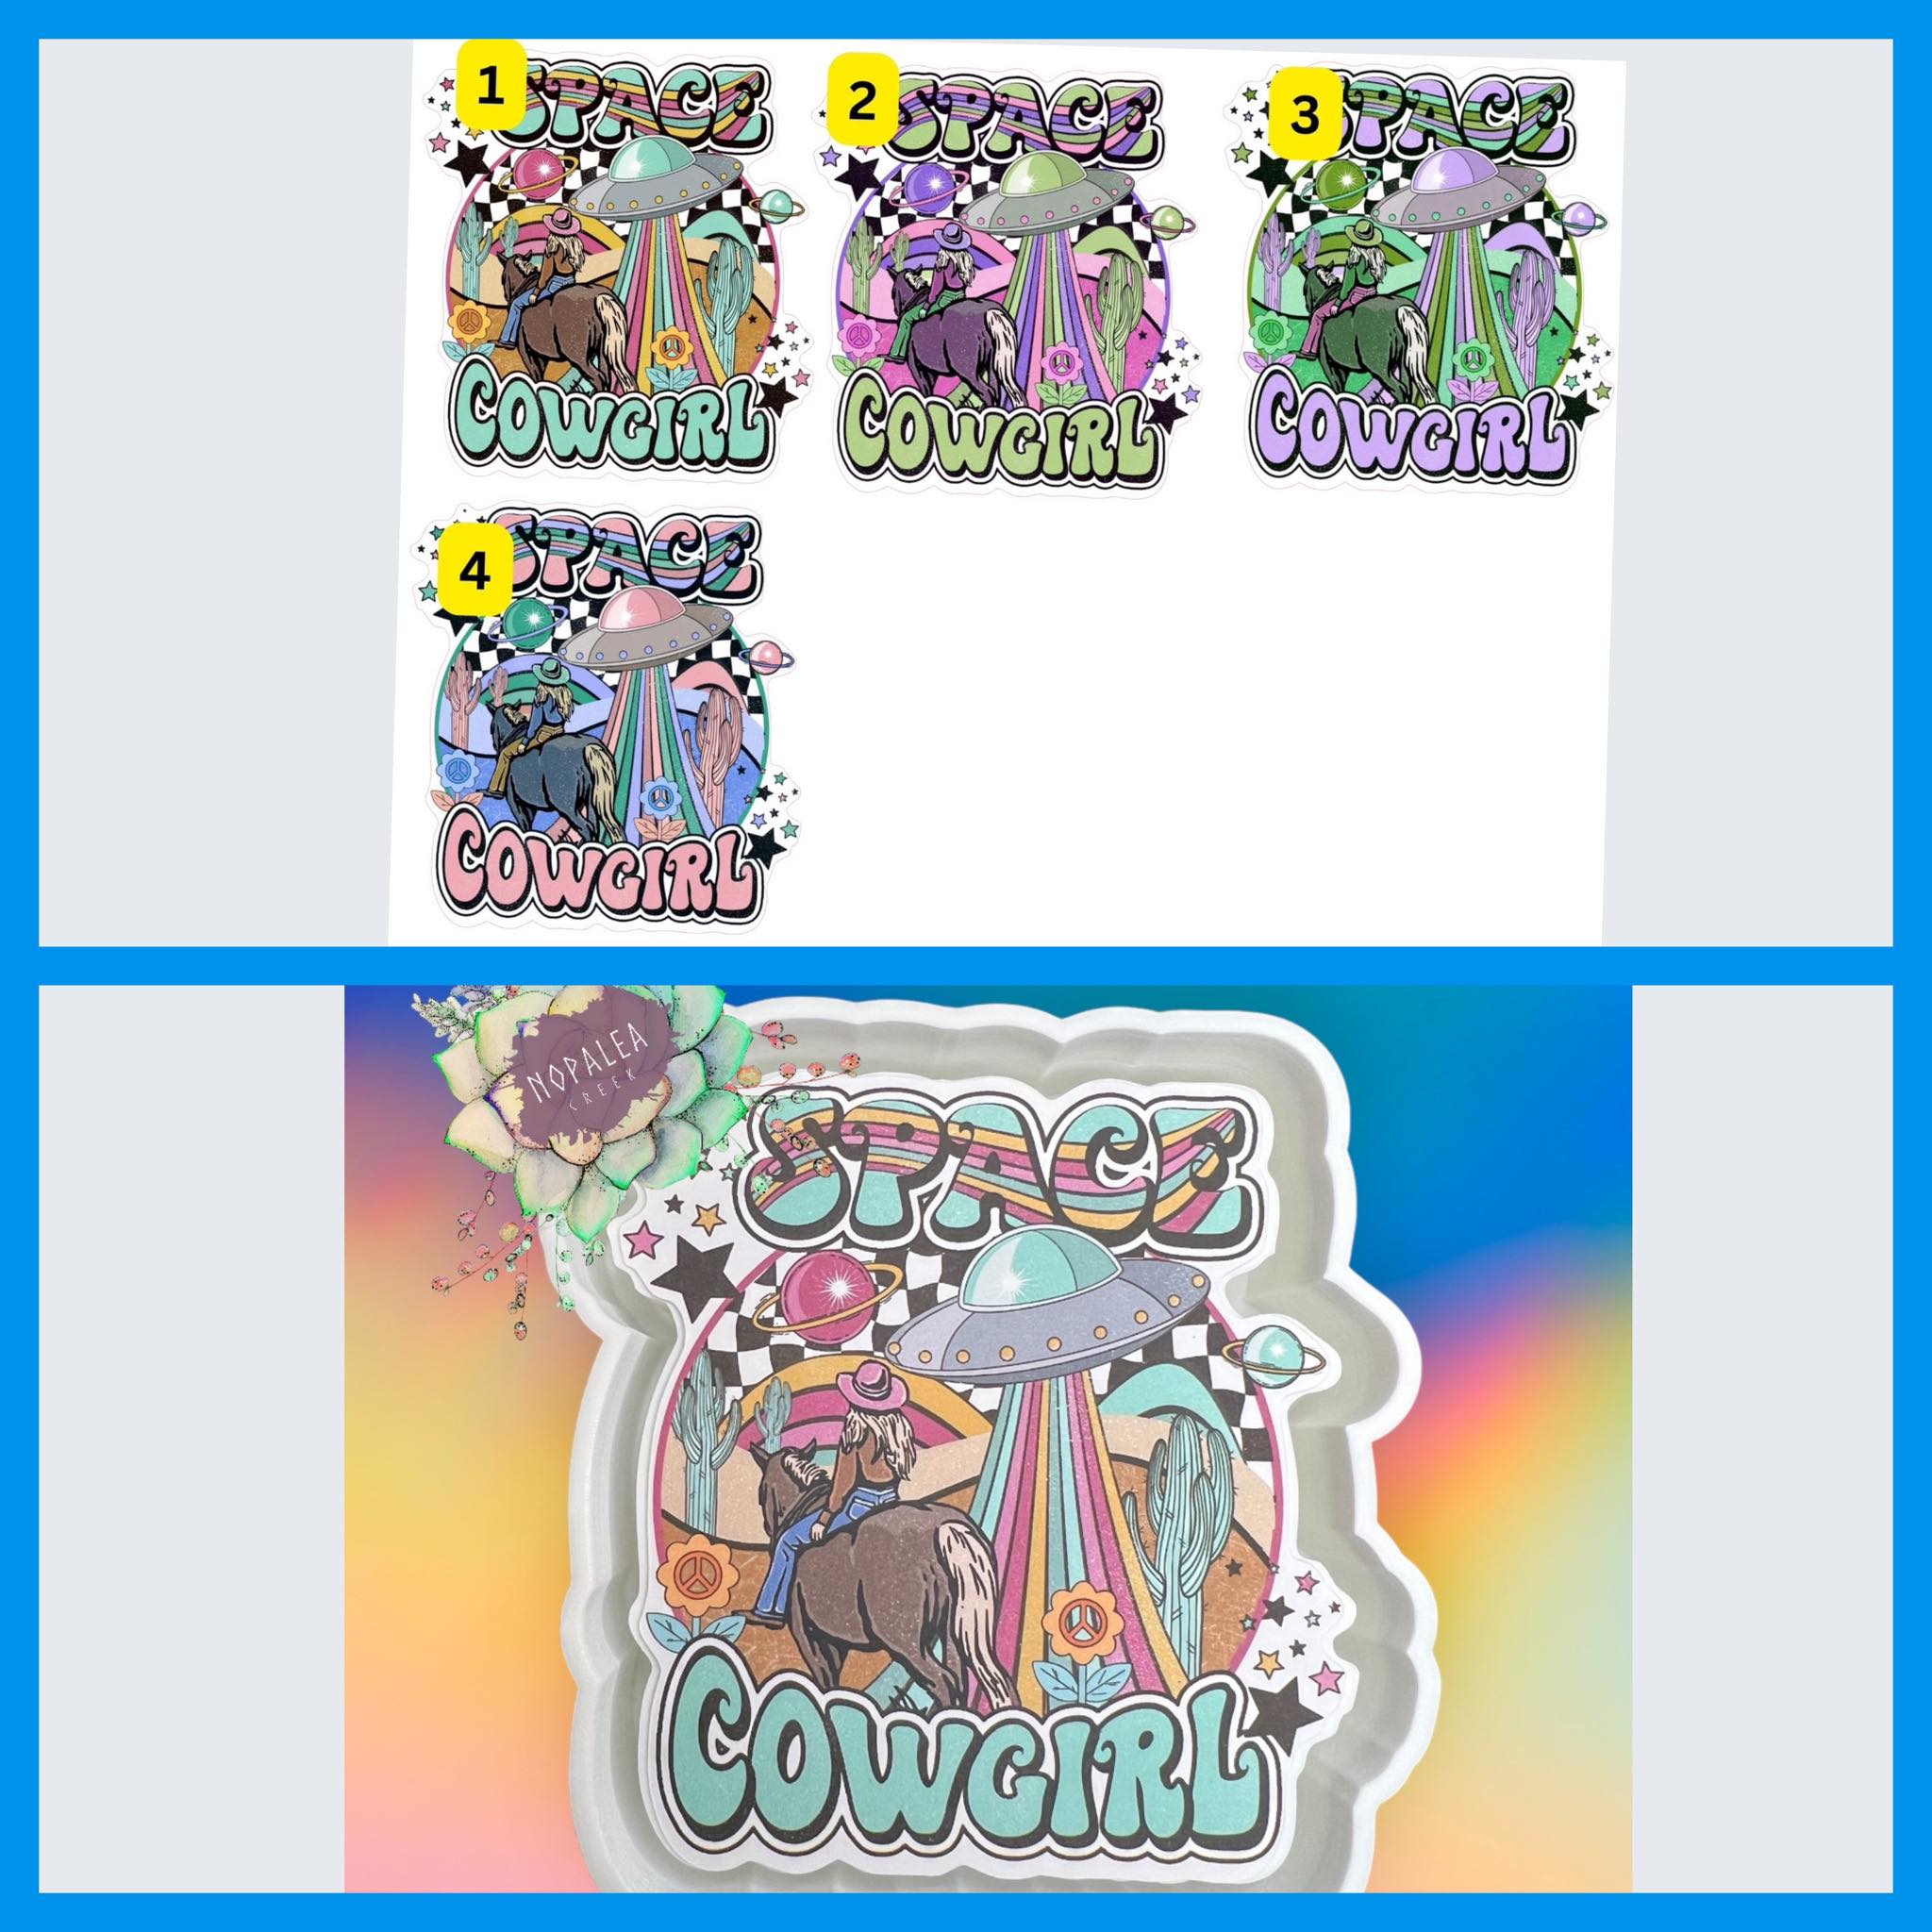 (B1304) Space Cowgirl Cardstock Silicone Mold - Includes 4 Cardstock